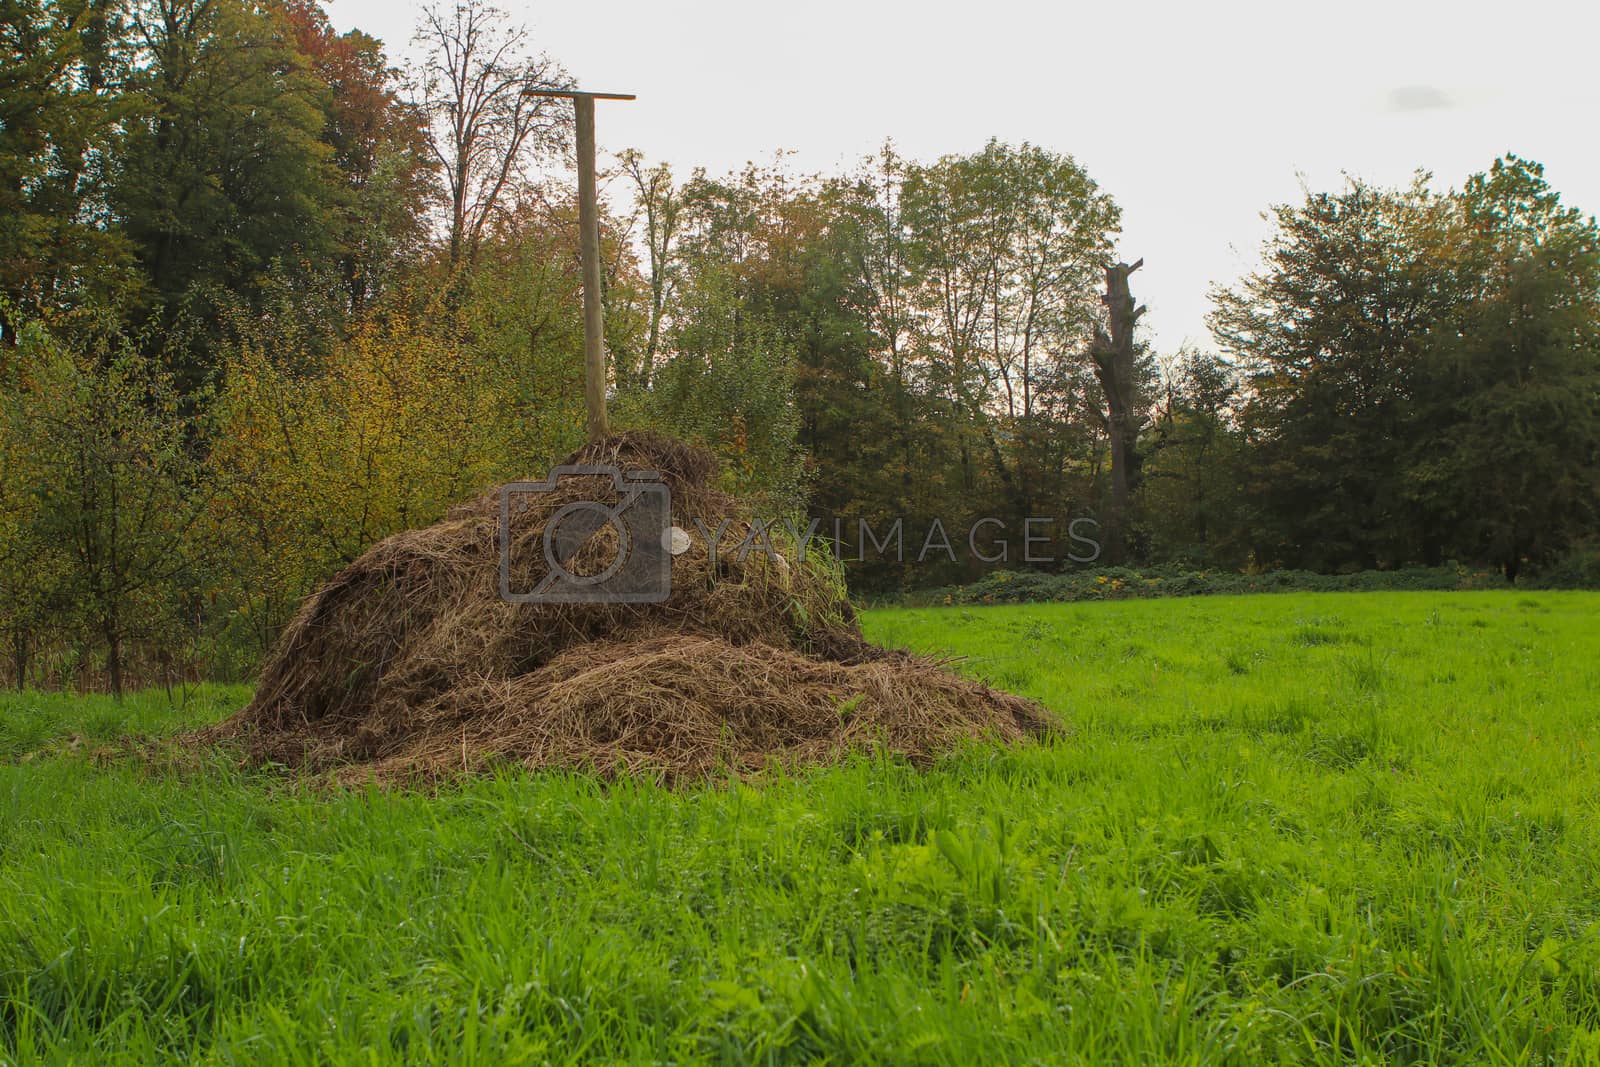 Royalty free image of composting in filed to gain organic fertilizer. One one to port by PeterHofstetter